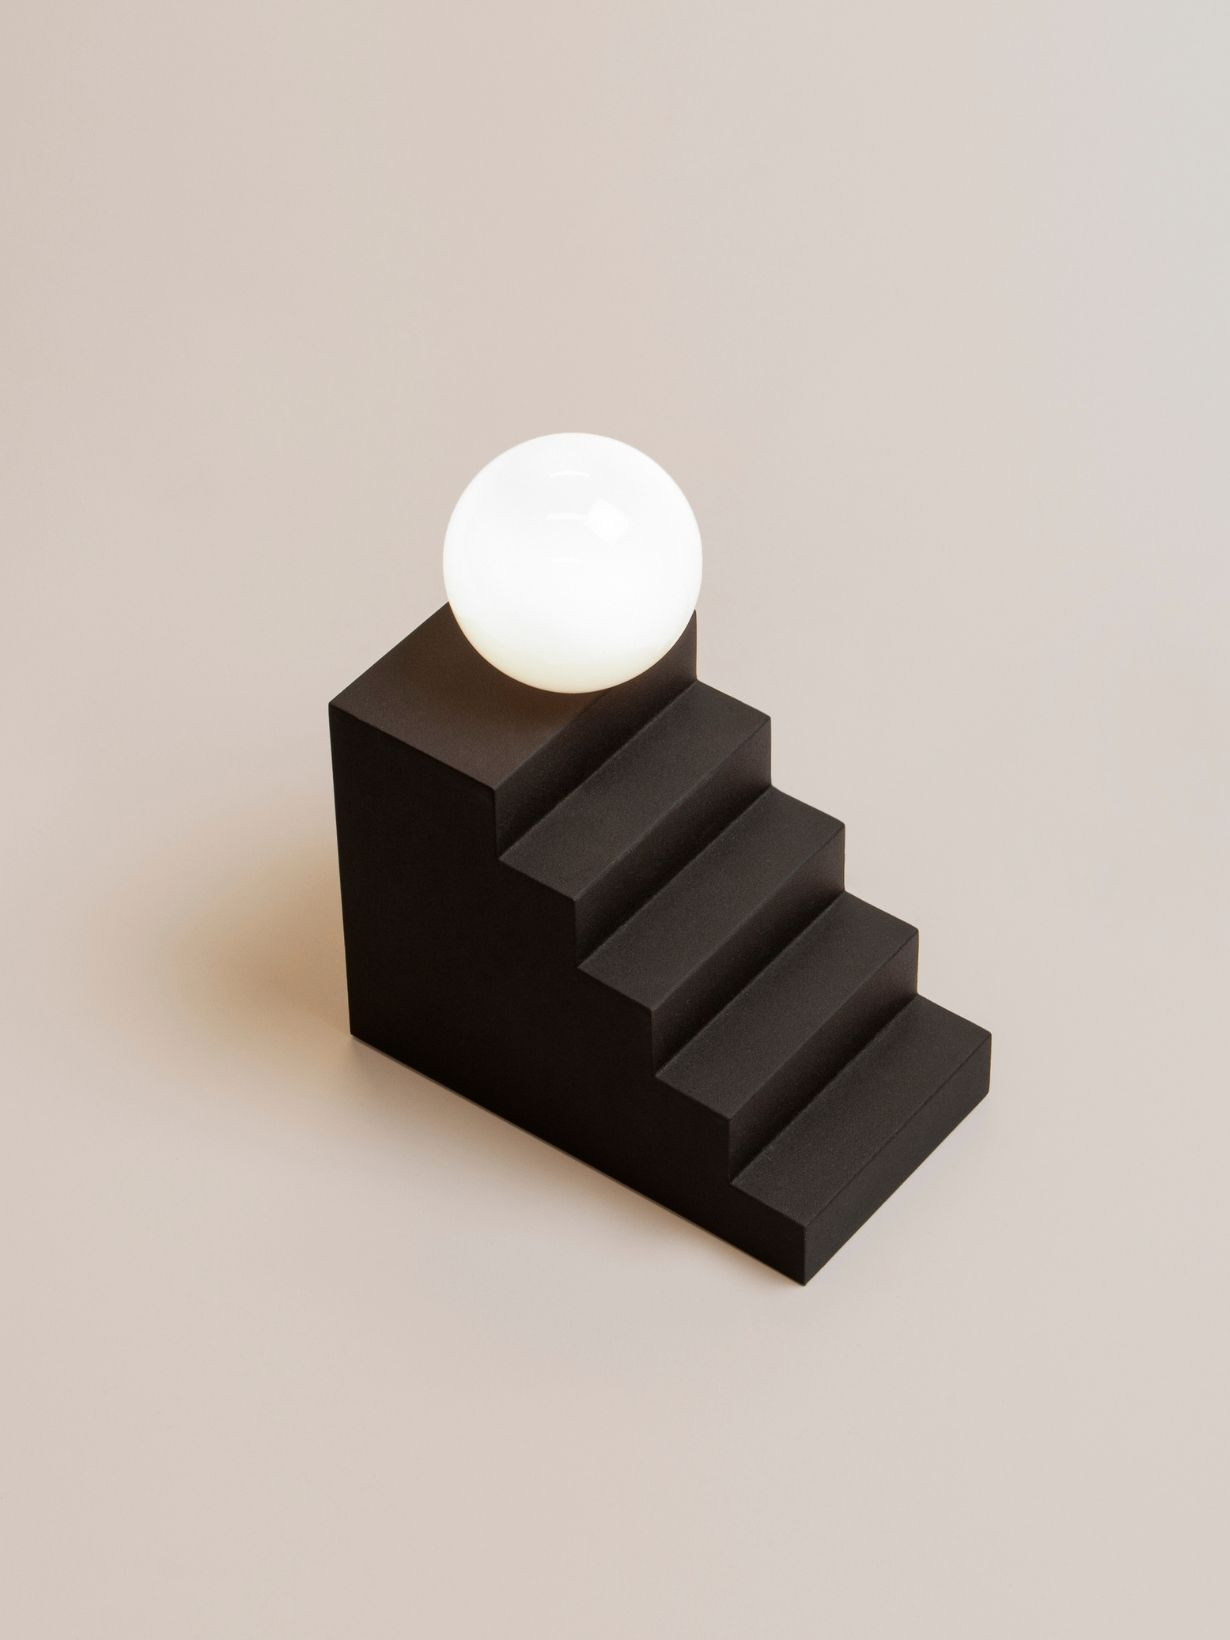 Oblure-Stair table lamp